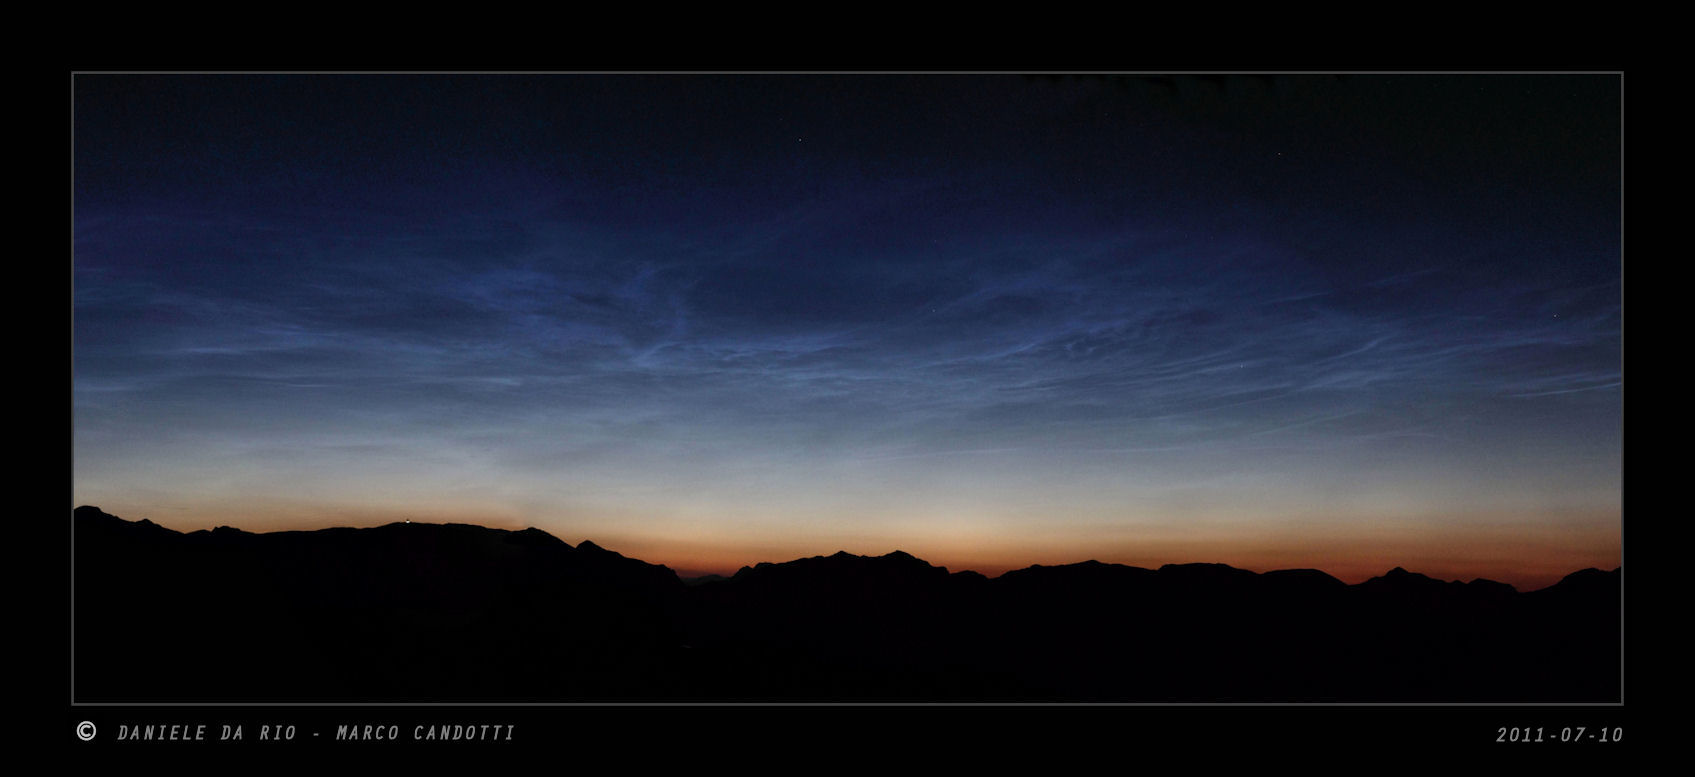 Noctilucent clouds over Mount Zoncolan: 99 KB; click on the image to enlarge